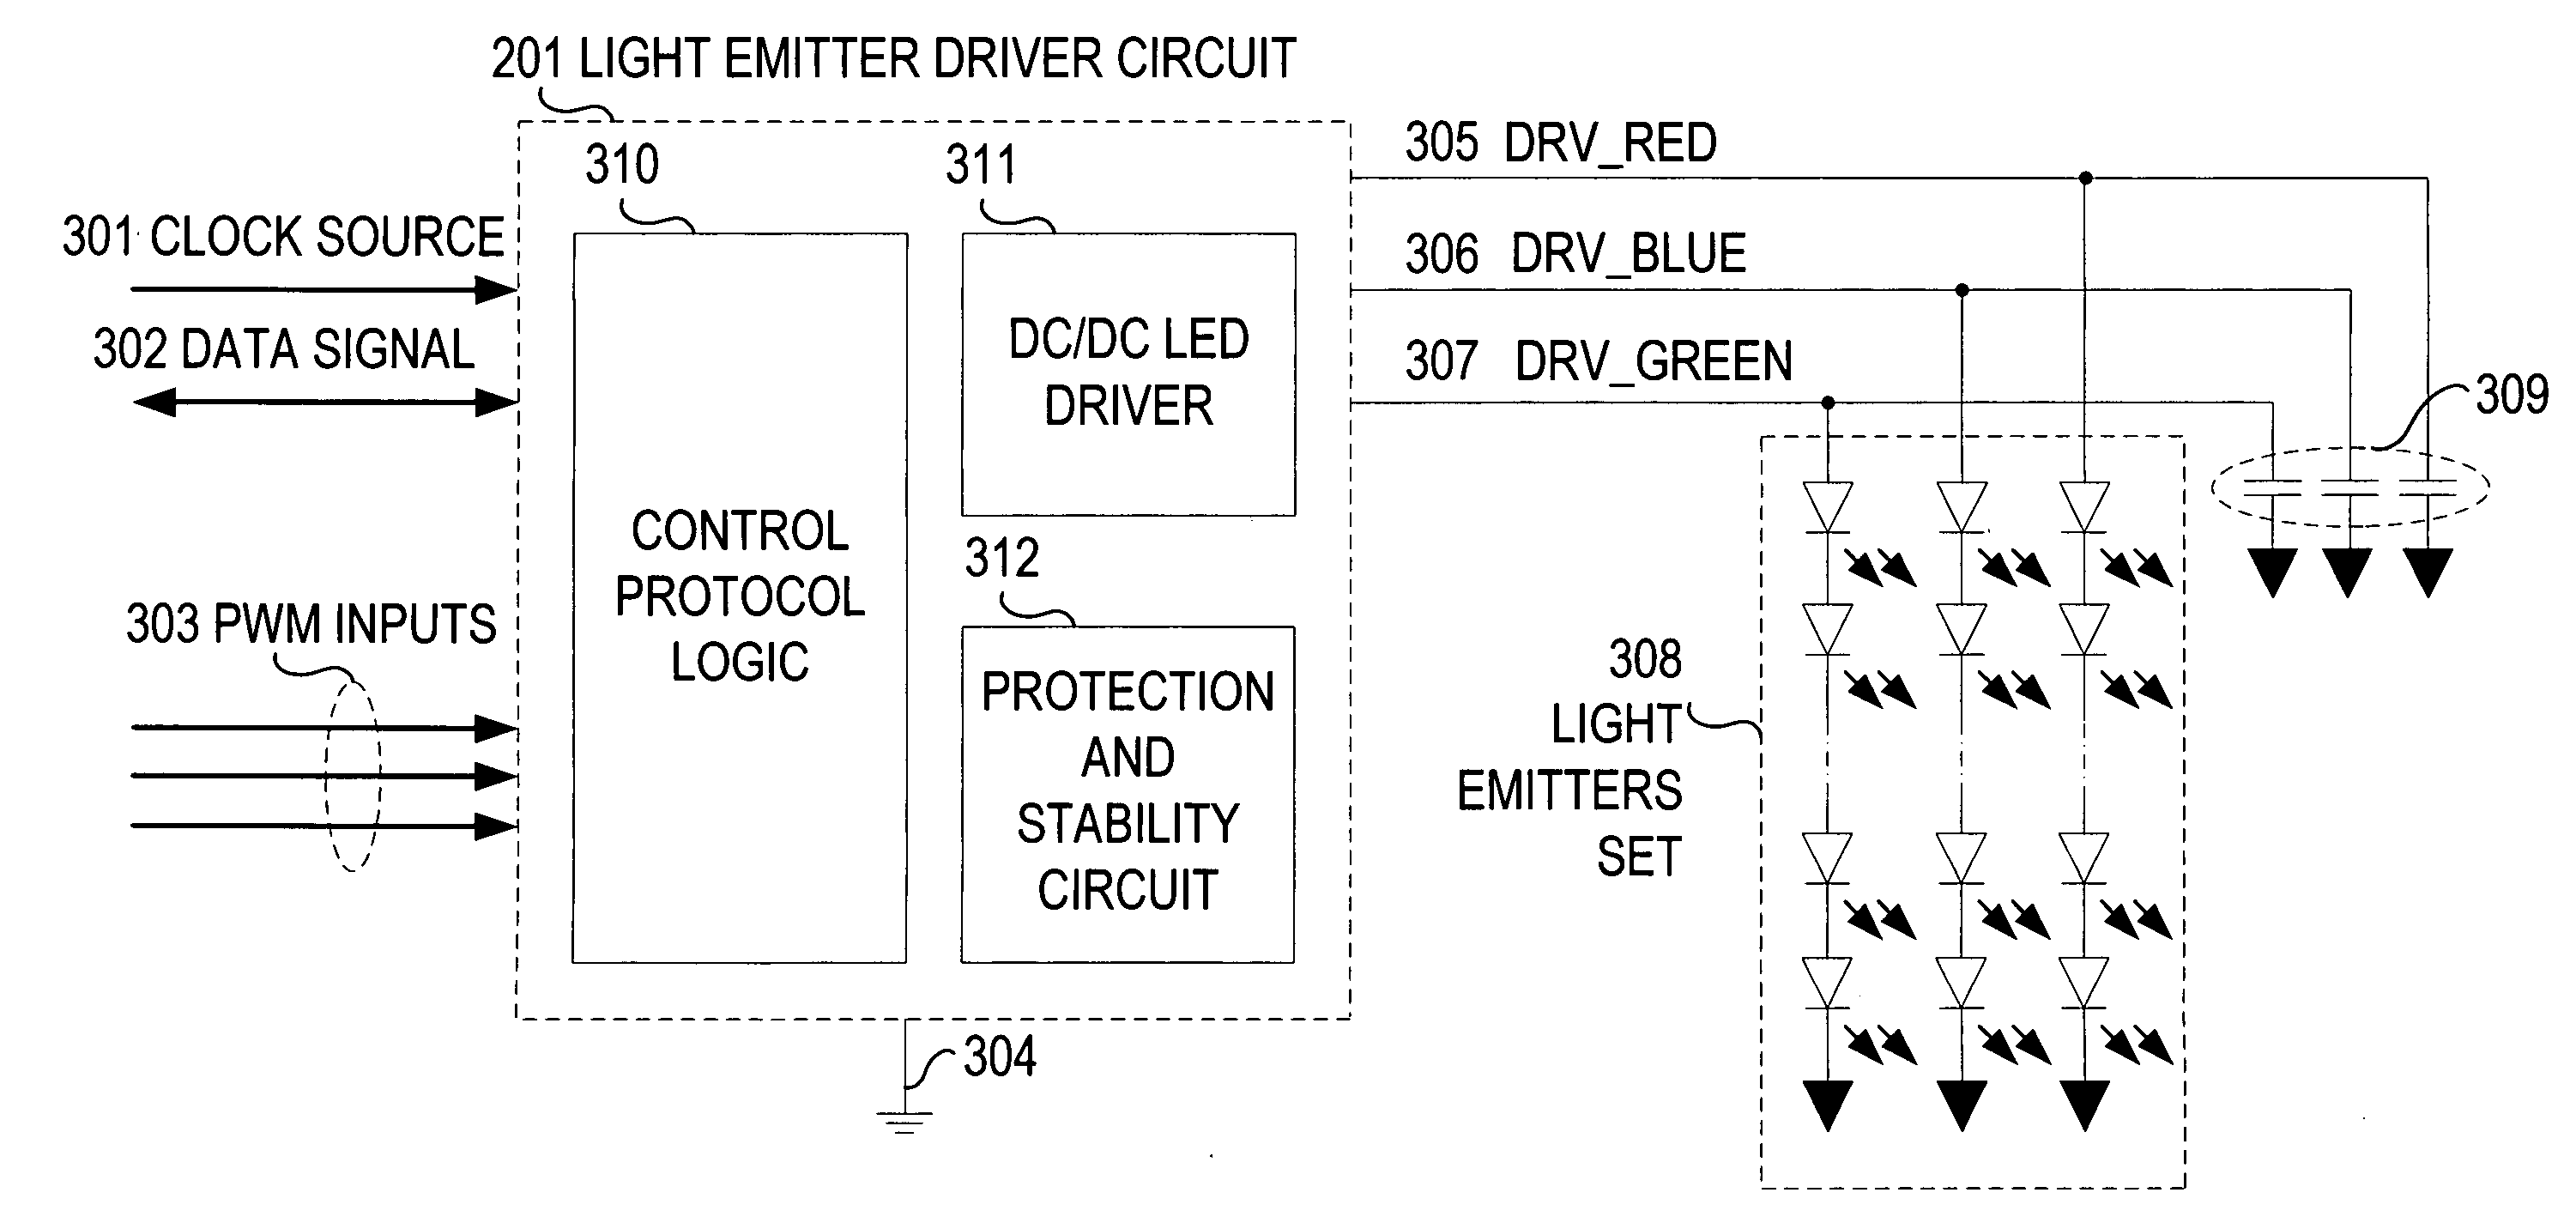 Methods and systems for LCD backlight color control